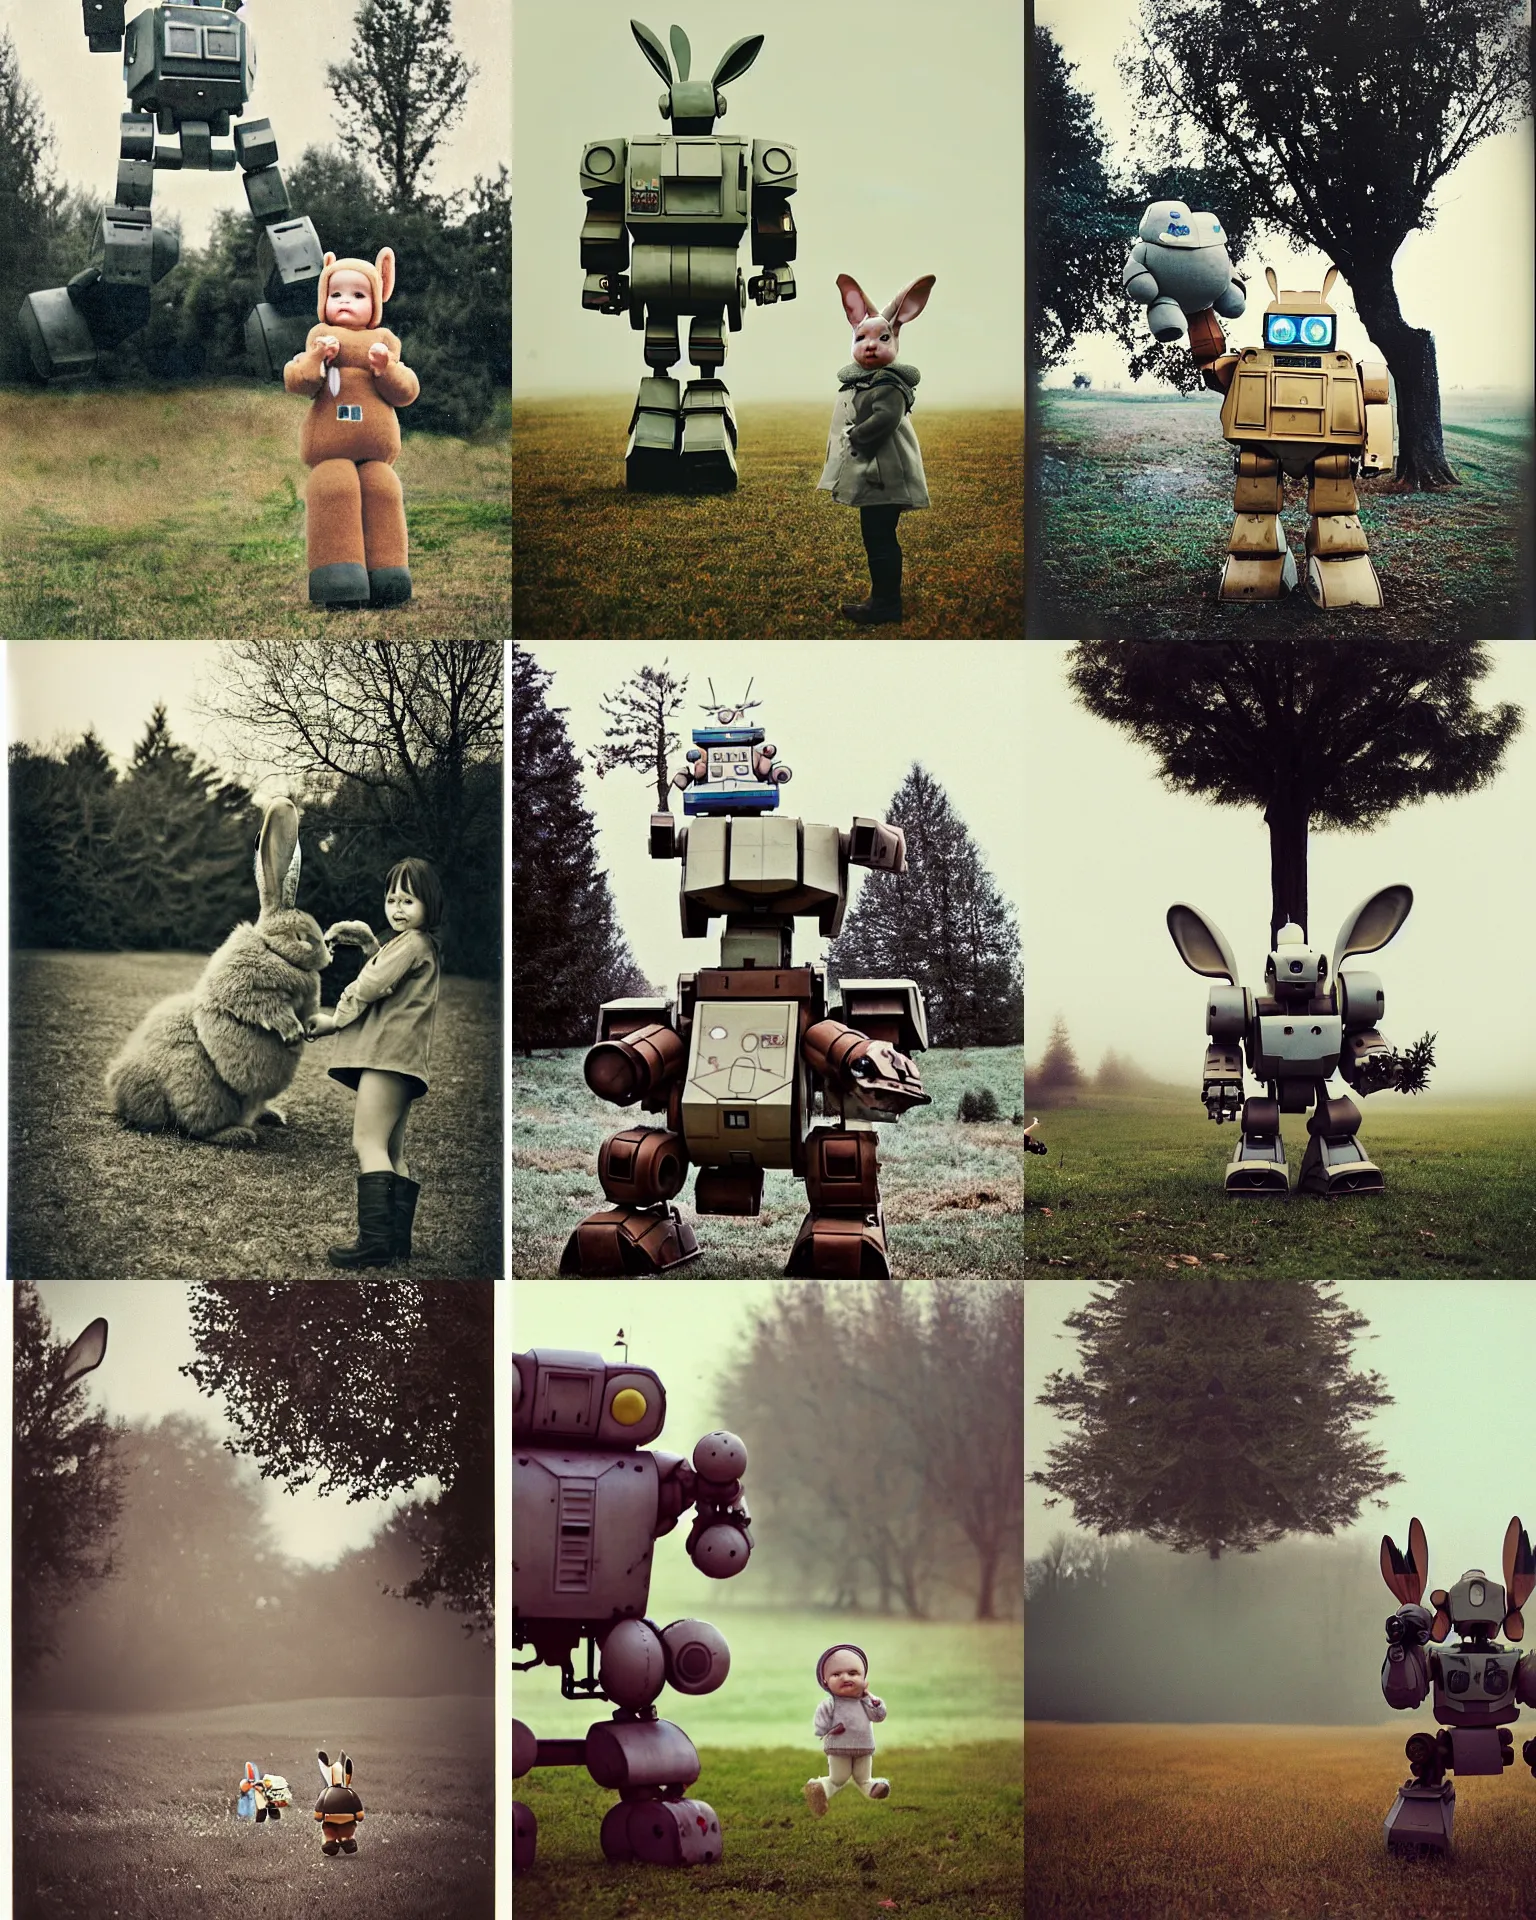 Prompt: giant oversized baby cute chubby battle robot mech with giant rabbit ears s as giant baby on village, Cinematic focus, small tree in far background, Polaroid photo, vintage, neutral colors, soft lights, foggy ,by Steve Hanks, by Serov Valentin, by lisa yuskavage, by Andrei Tarkovsky